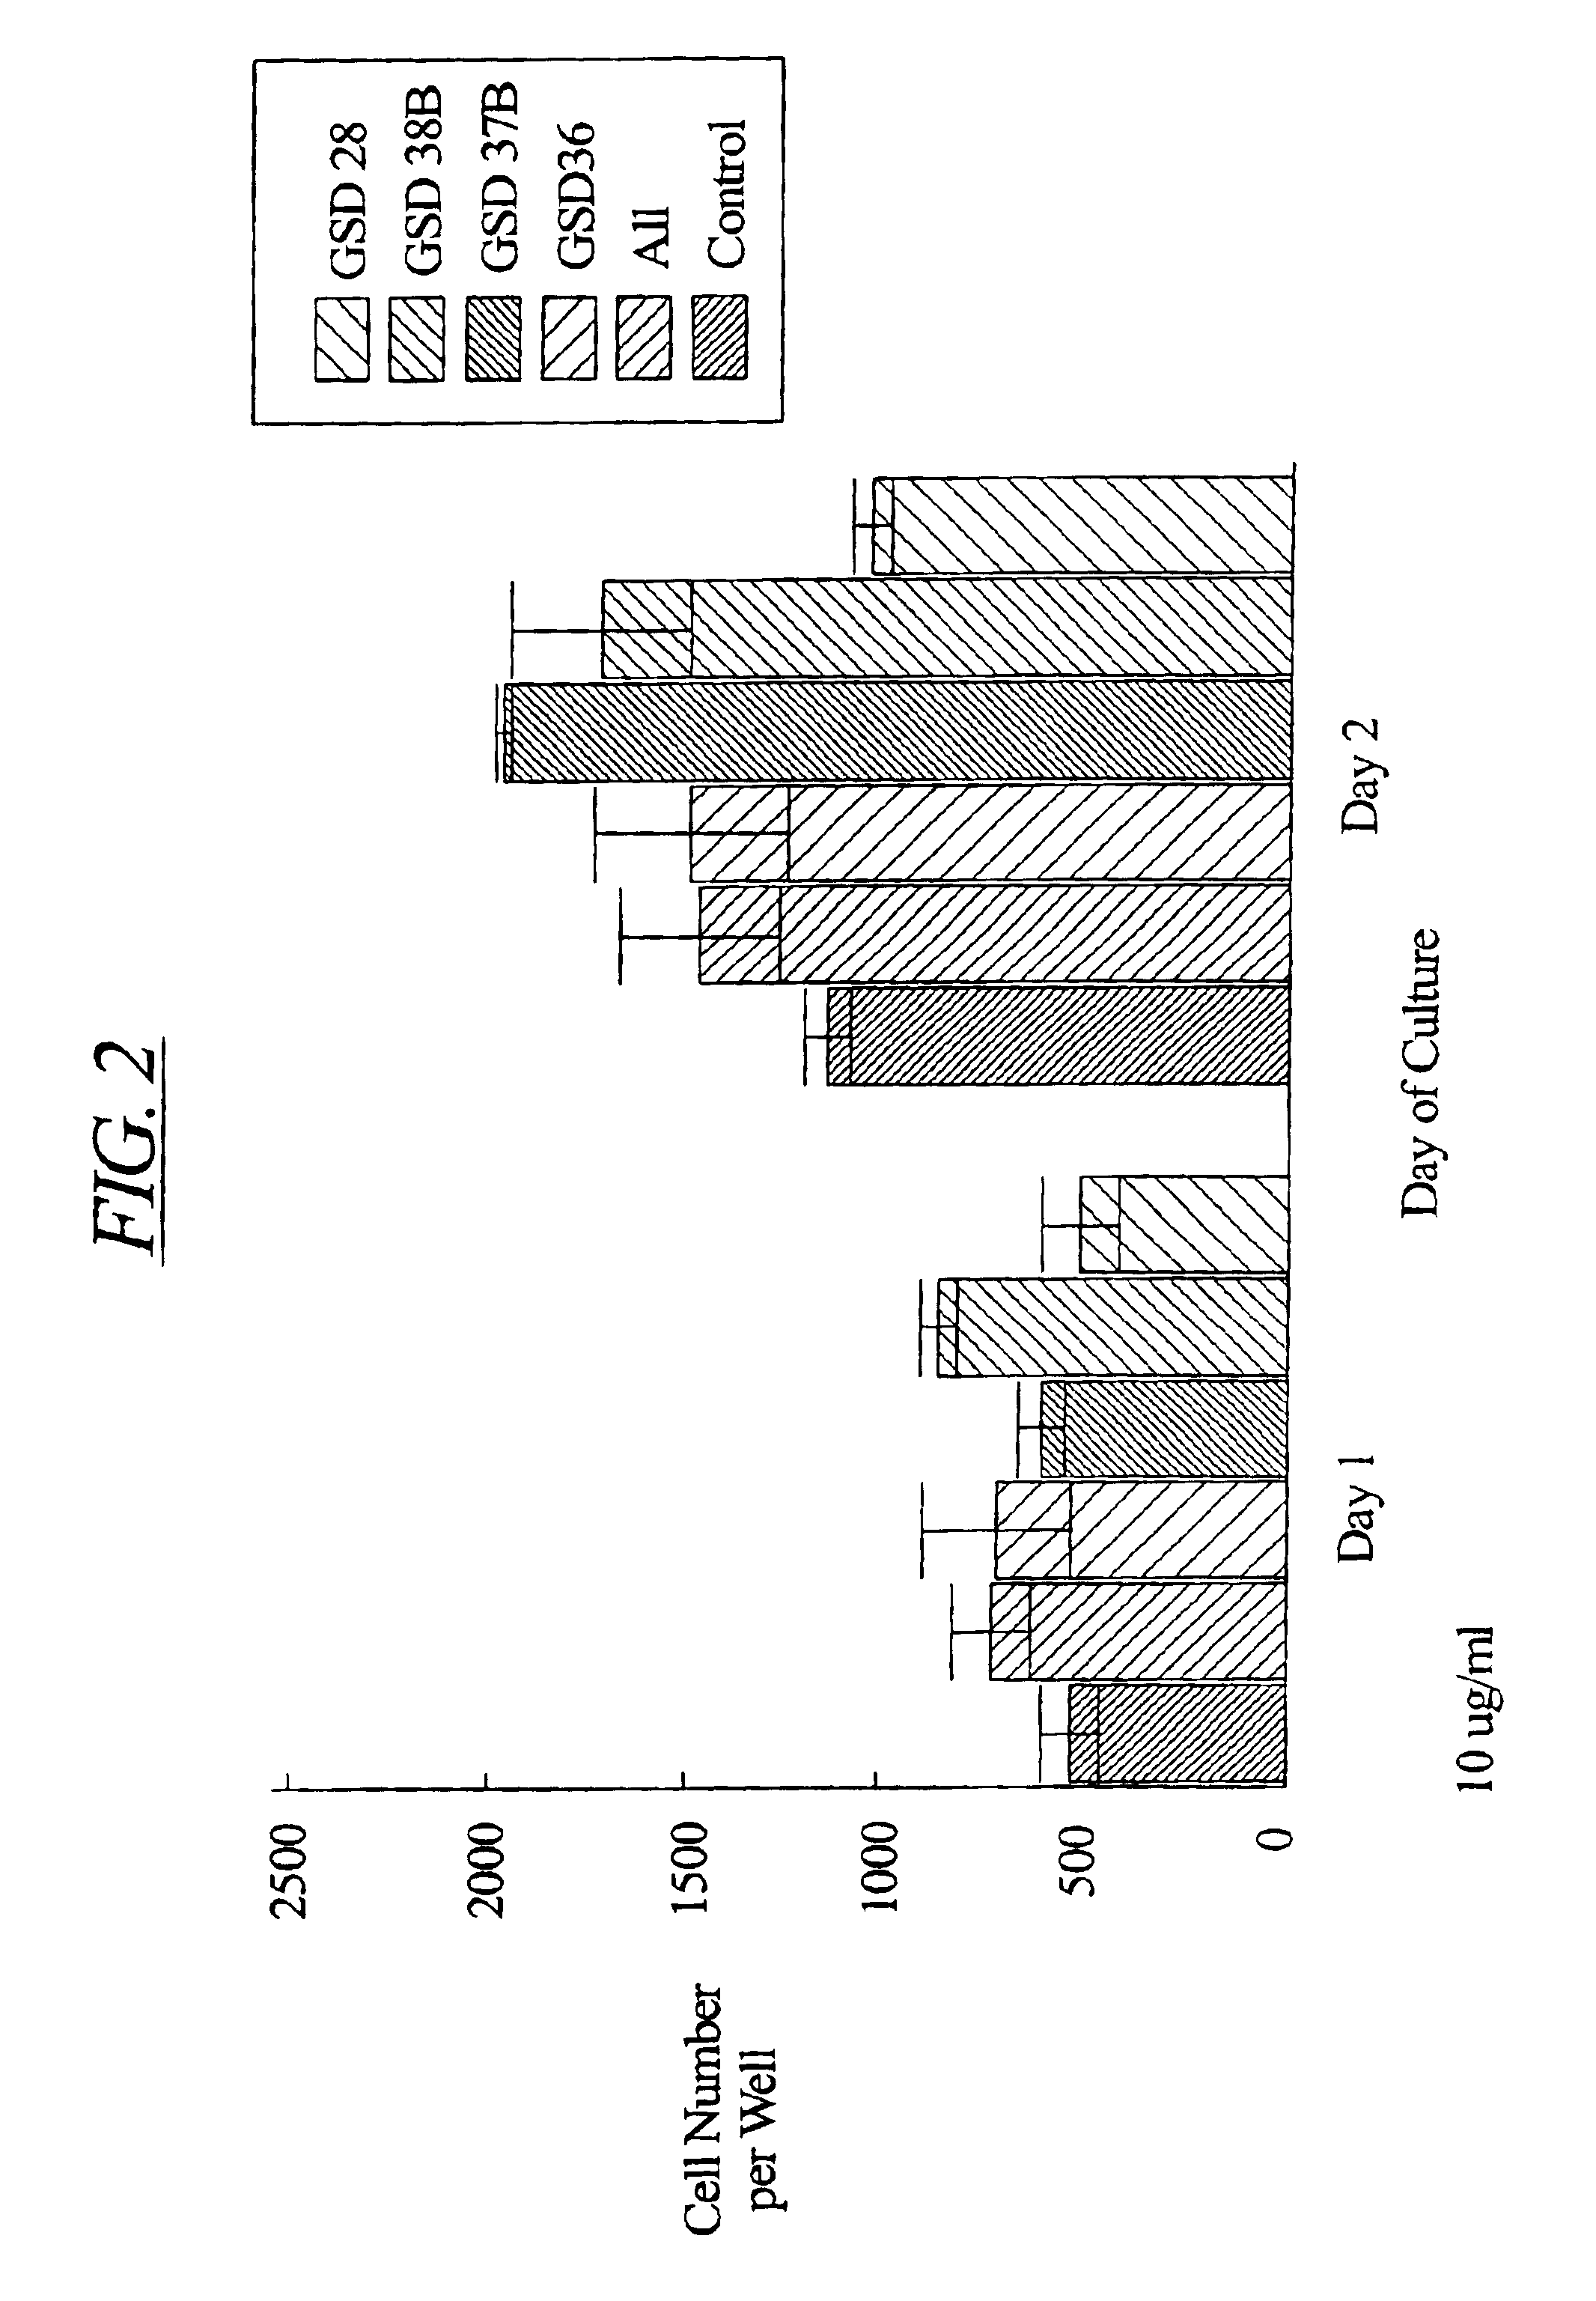 Methods for accelerating bone and cartilage growth and repair